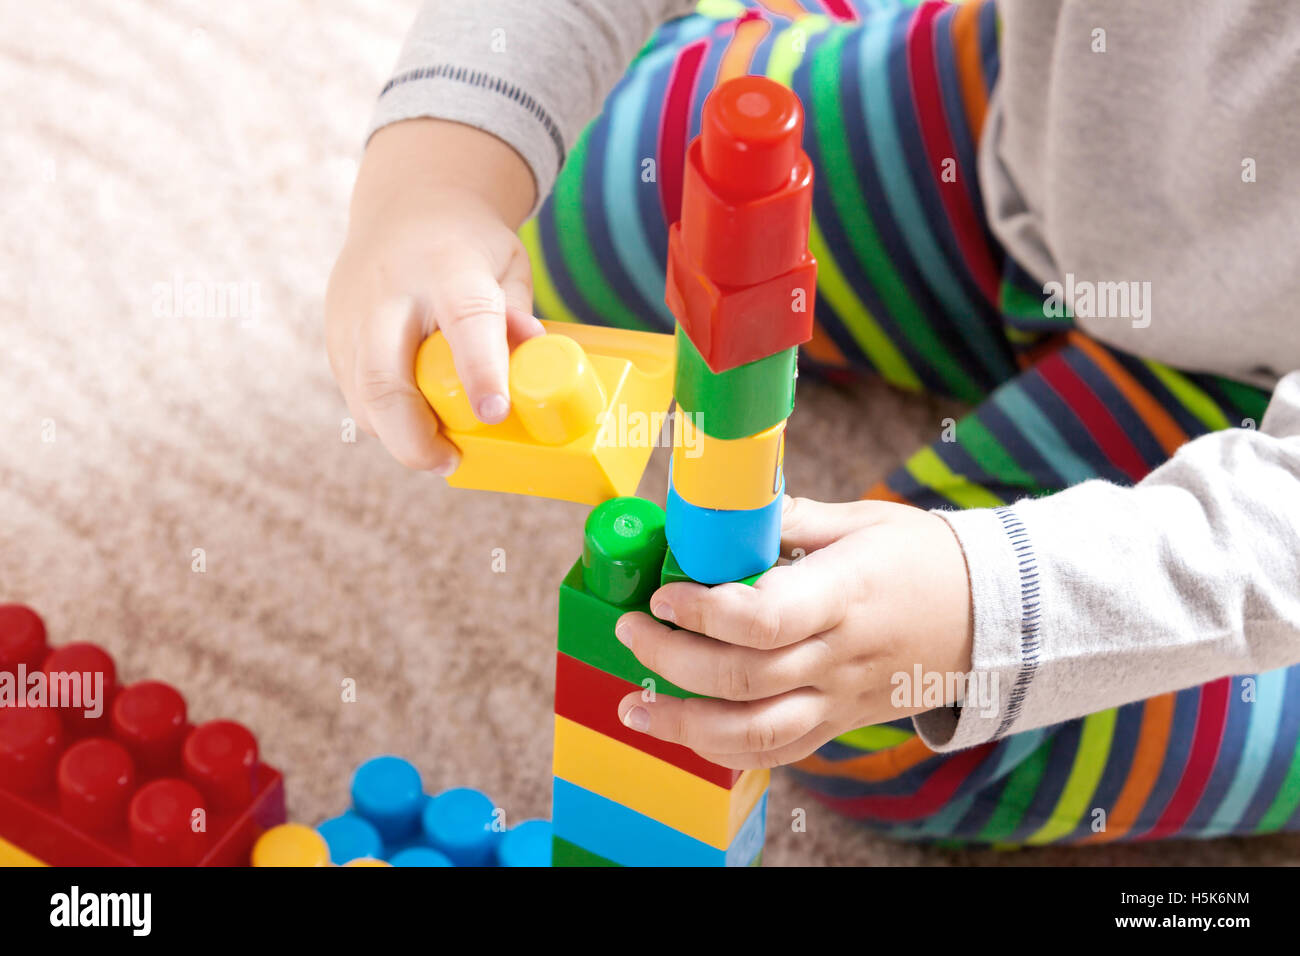 Playing little boy with colored cubes Stock Photo